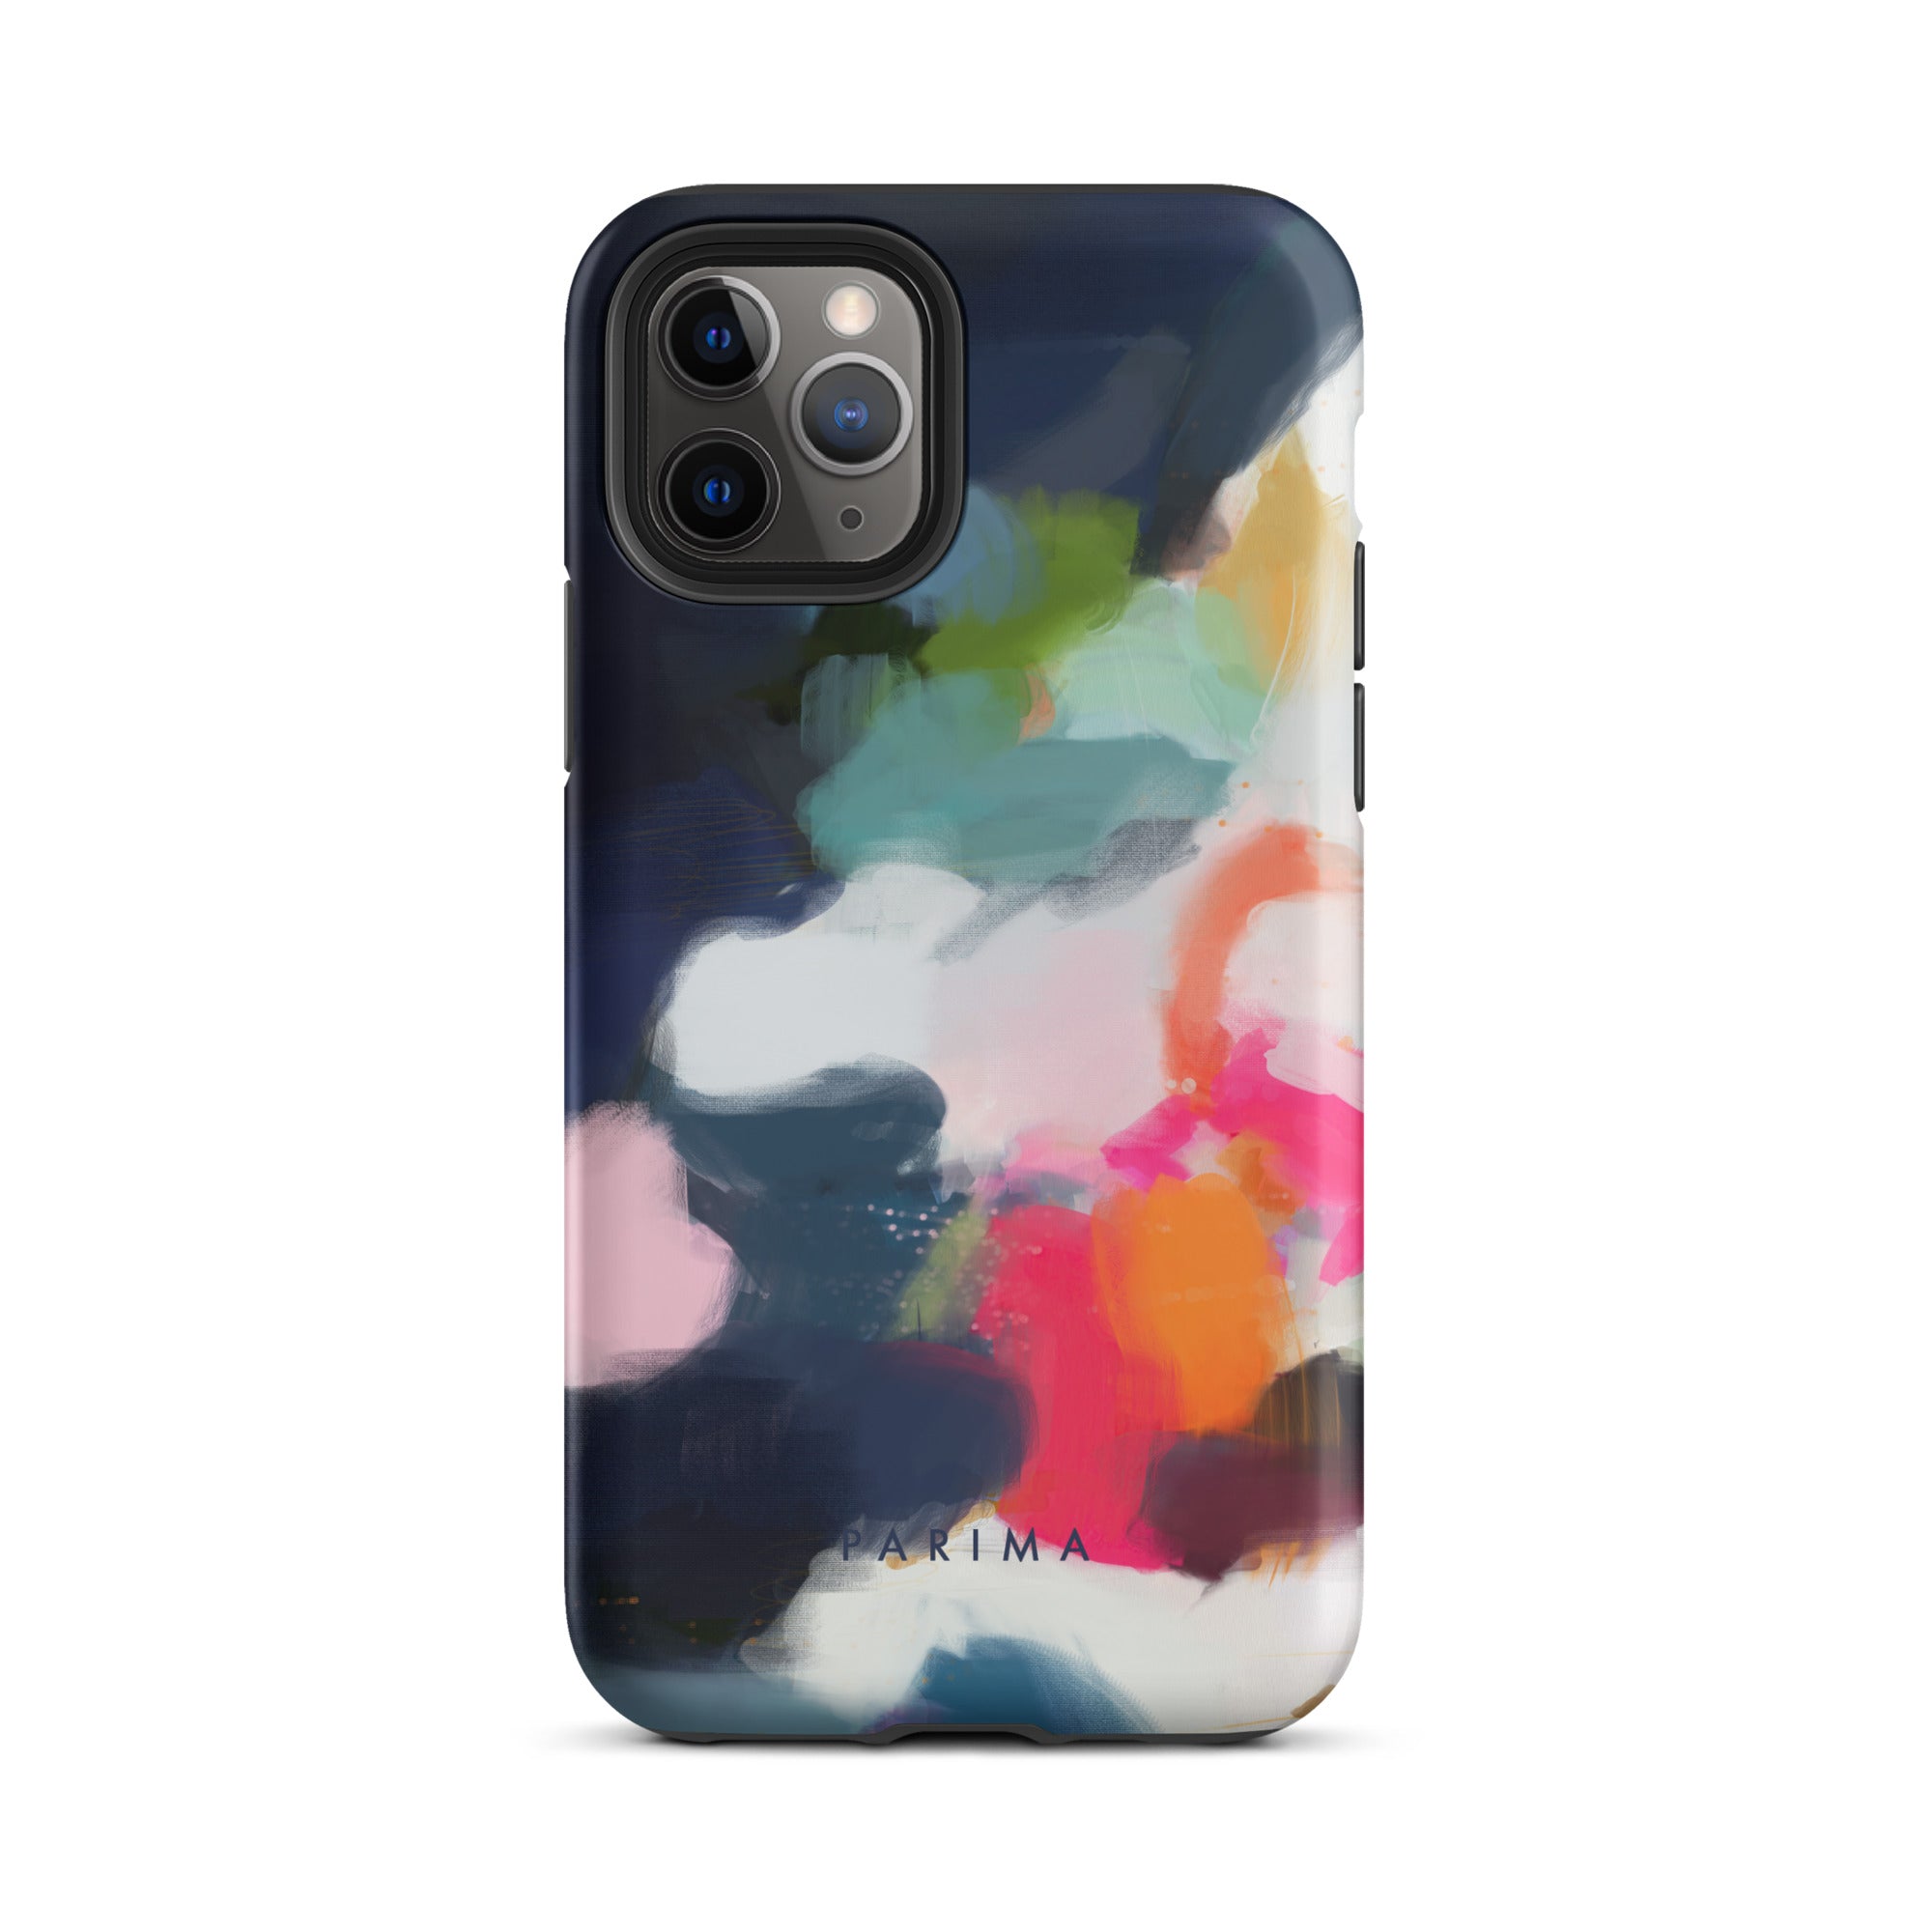 Eliza, pink and blue abstract art - iPhone 11 Pro tough case by Parima Studio